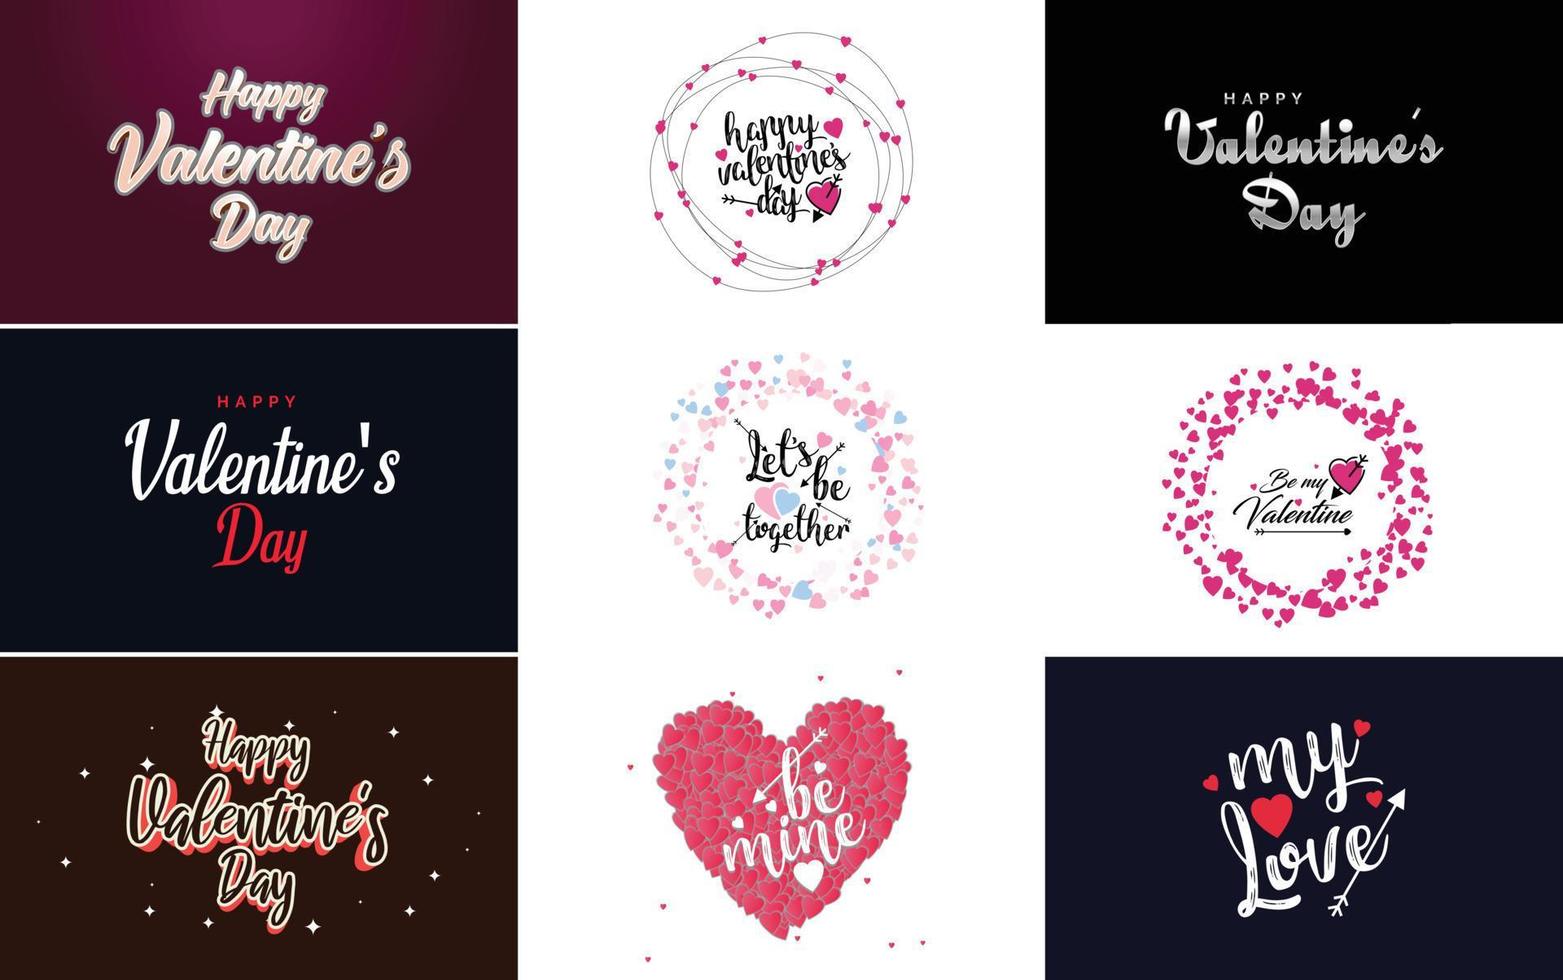 I Love You hand-drawn lettering with a heart design. suitable for use as a Valentine's Day greeting or in romantic designs vector